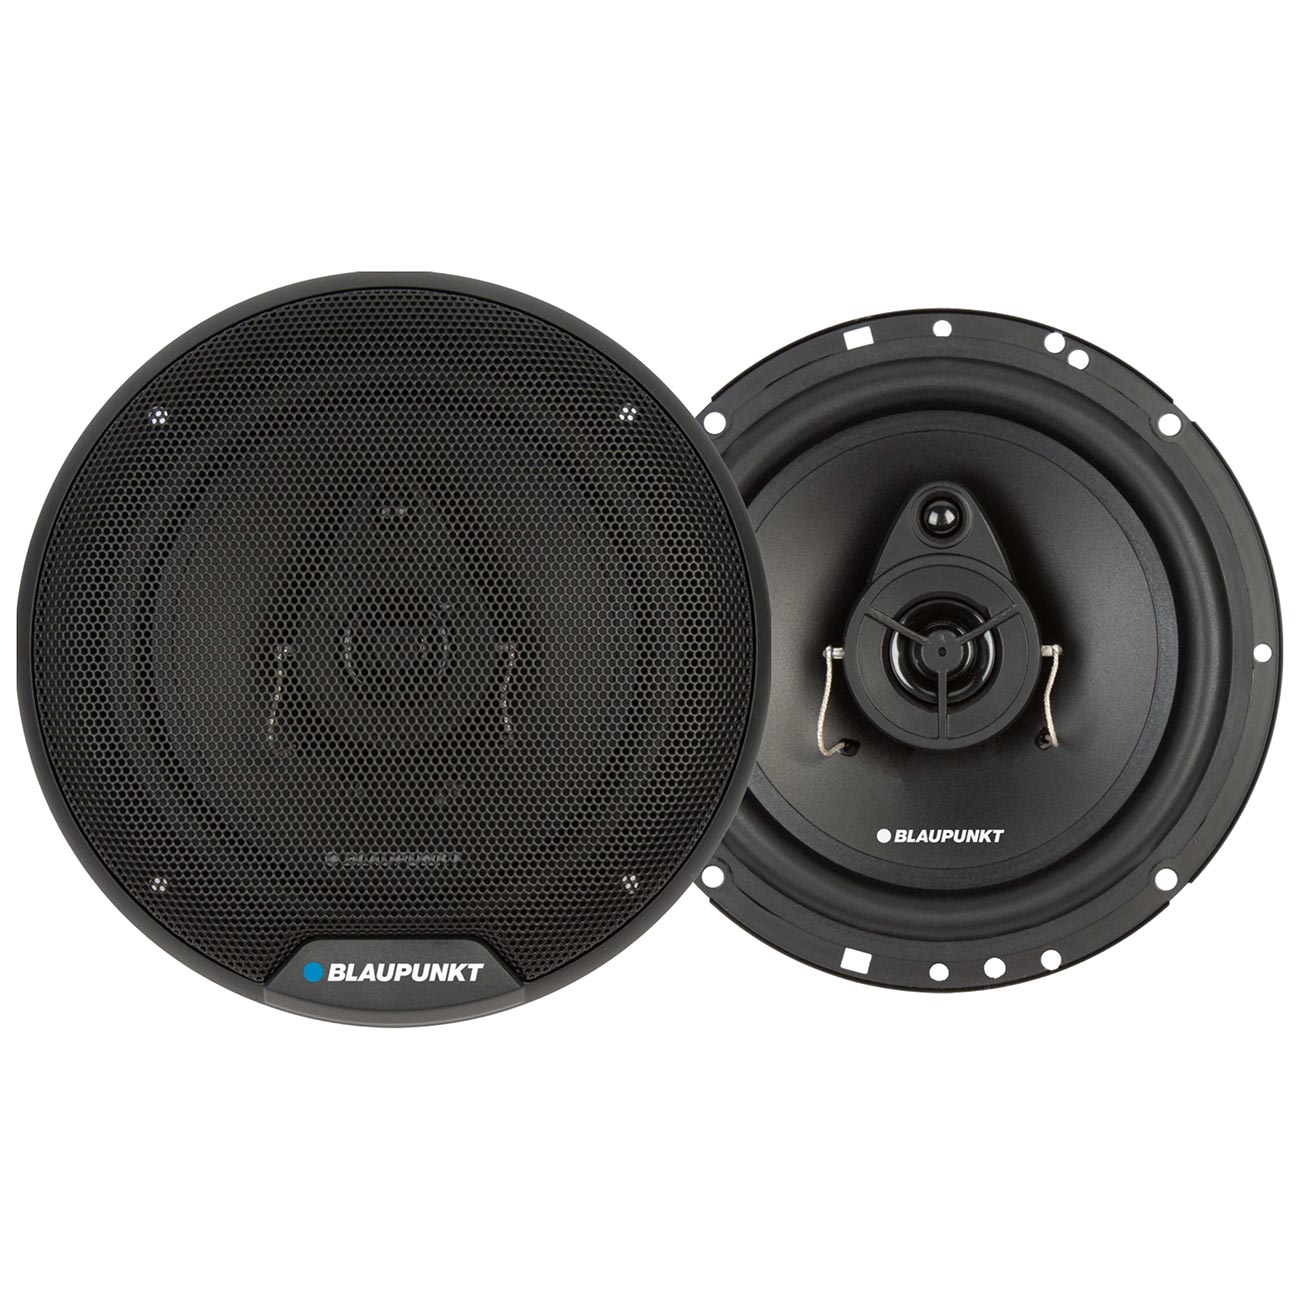 Blaupunkt E-Series 6.5" 3-Way SLIM Type Coaxial Speakers 30WRMS / 60W Max